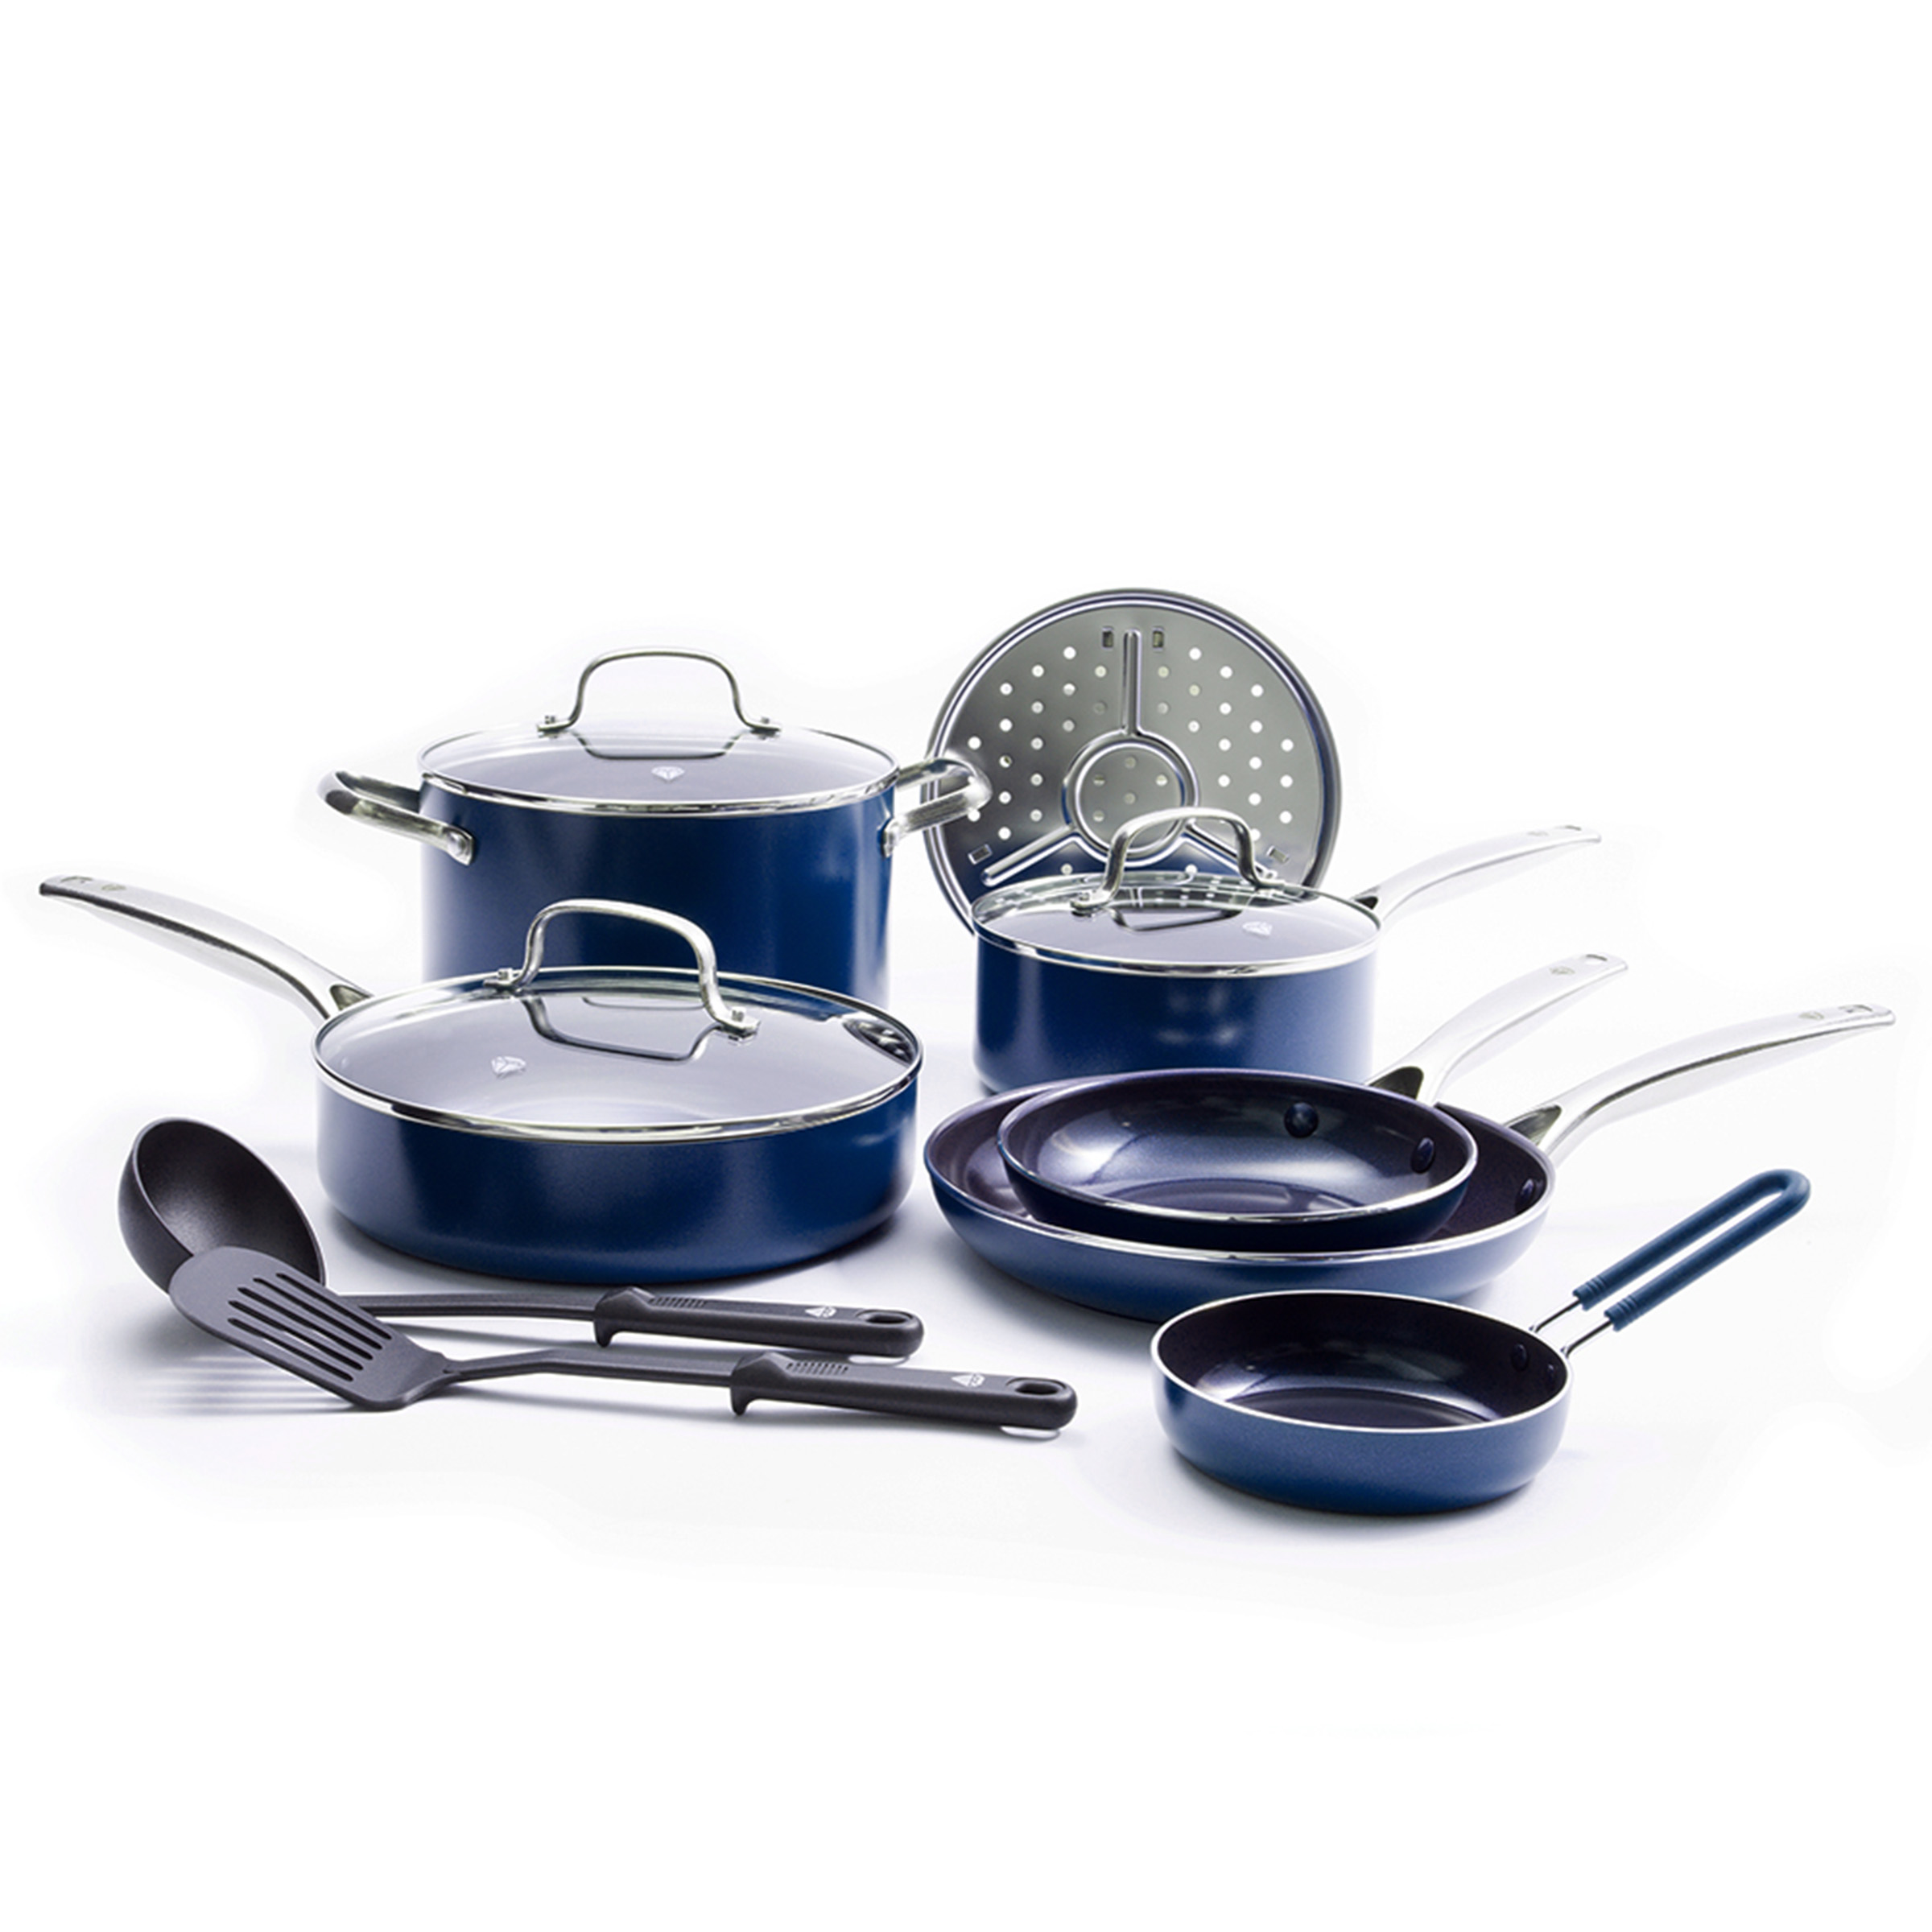 Blue Diamond 12-Piece Toxin-Free Ceramic Nonstick Pots and Pans Cookware Set, Dishwasher Safe - image 1 of 10